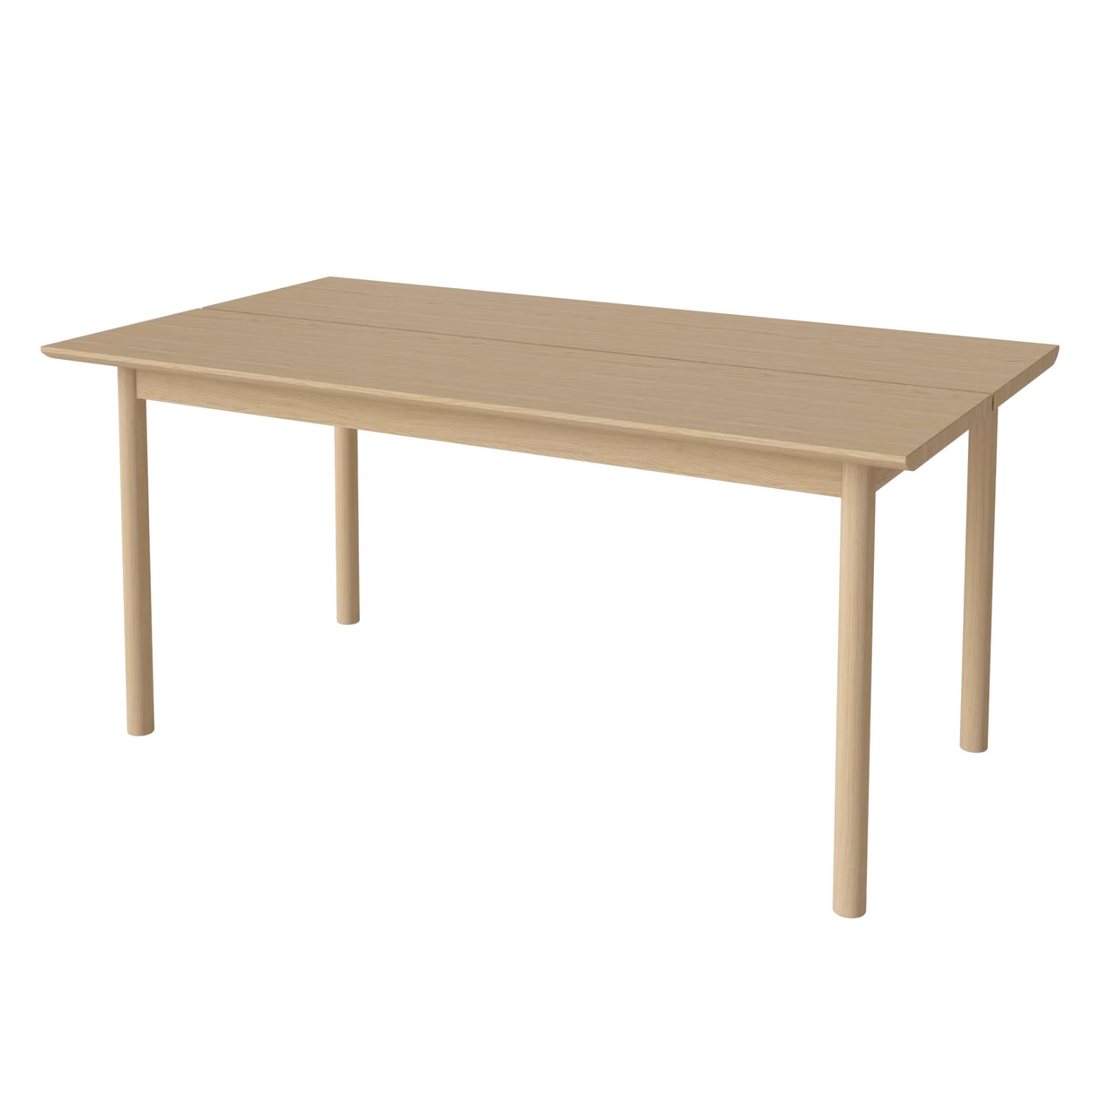 Track | Dining table